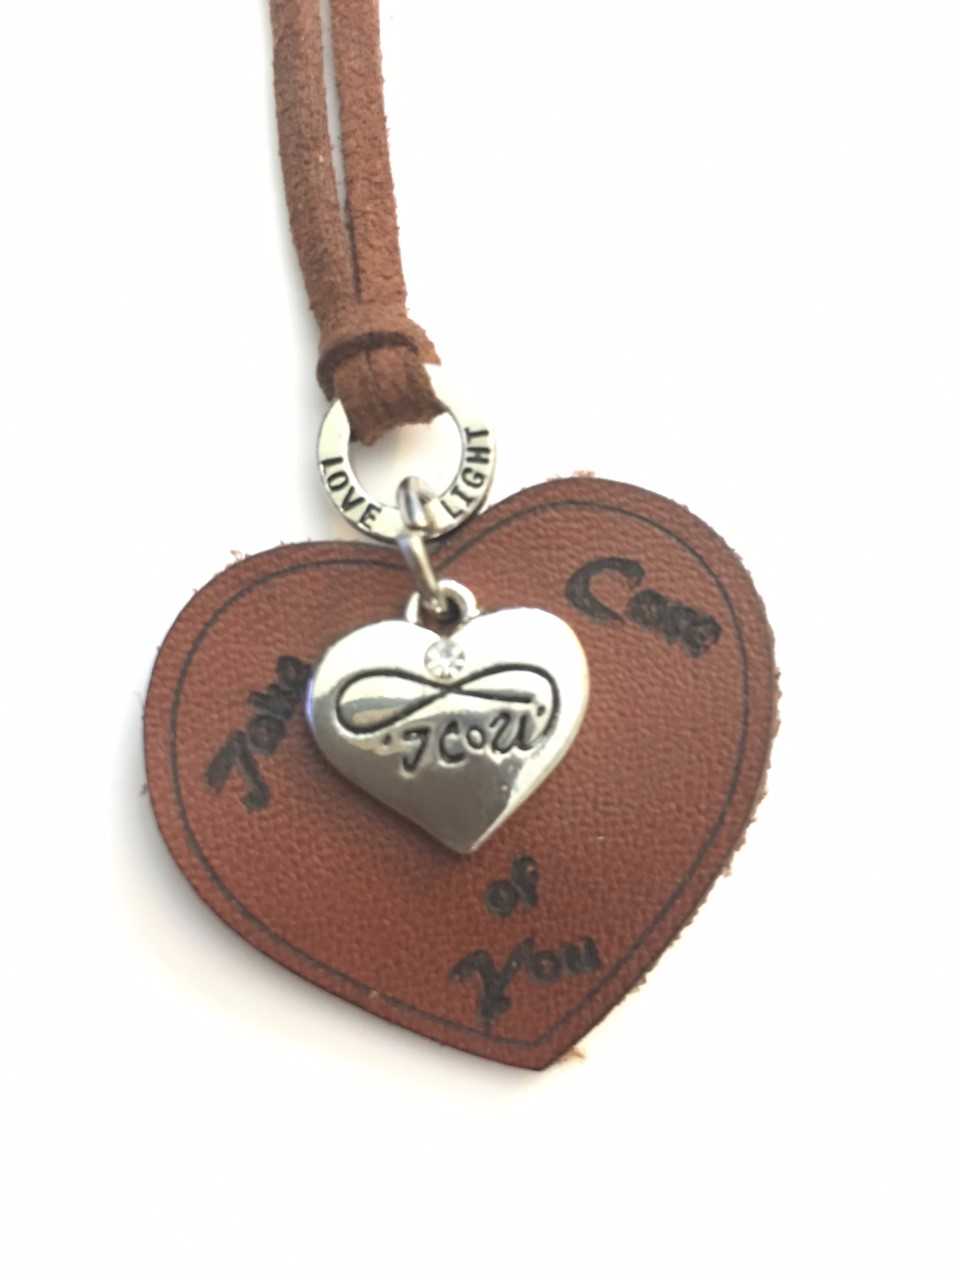 TCoU Heart Leather Necklace Represents Love & Light